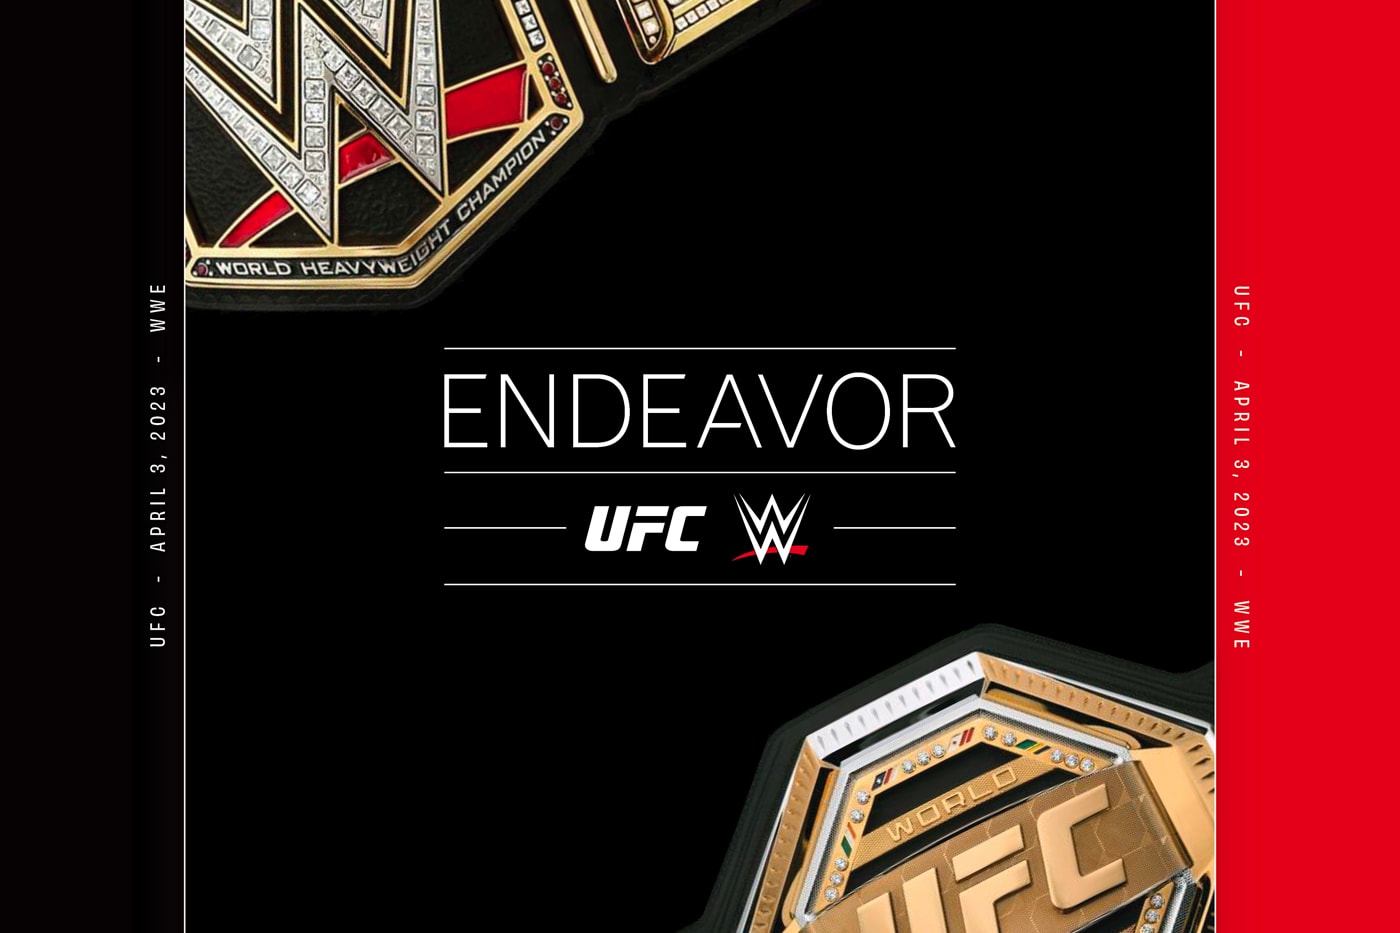 WWE UFC $21 Billion USD Company Announcement Info NewCo Endeavor Group Holdings Inc. Professional Wrestling MMA